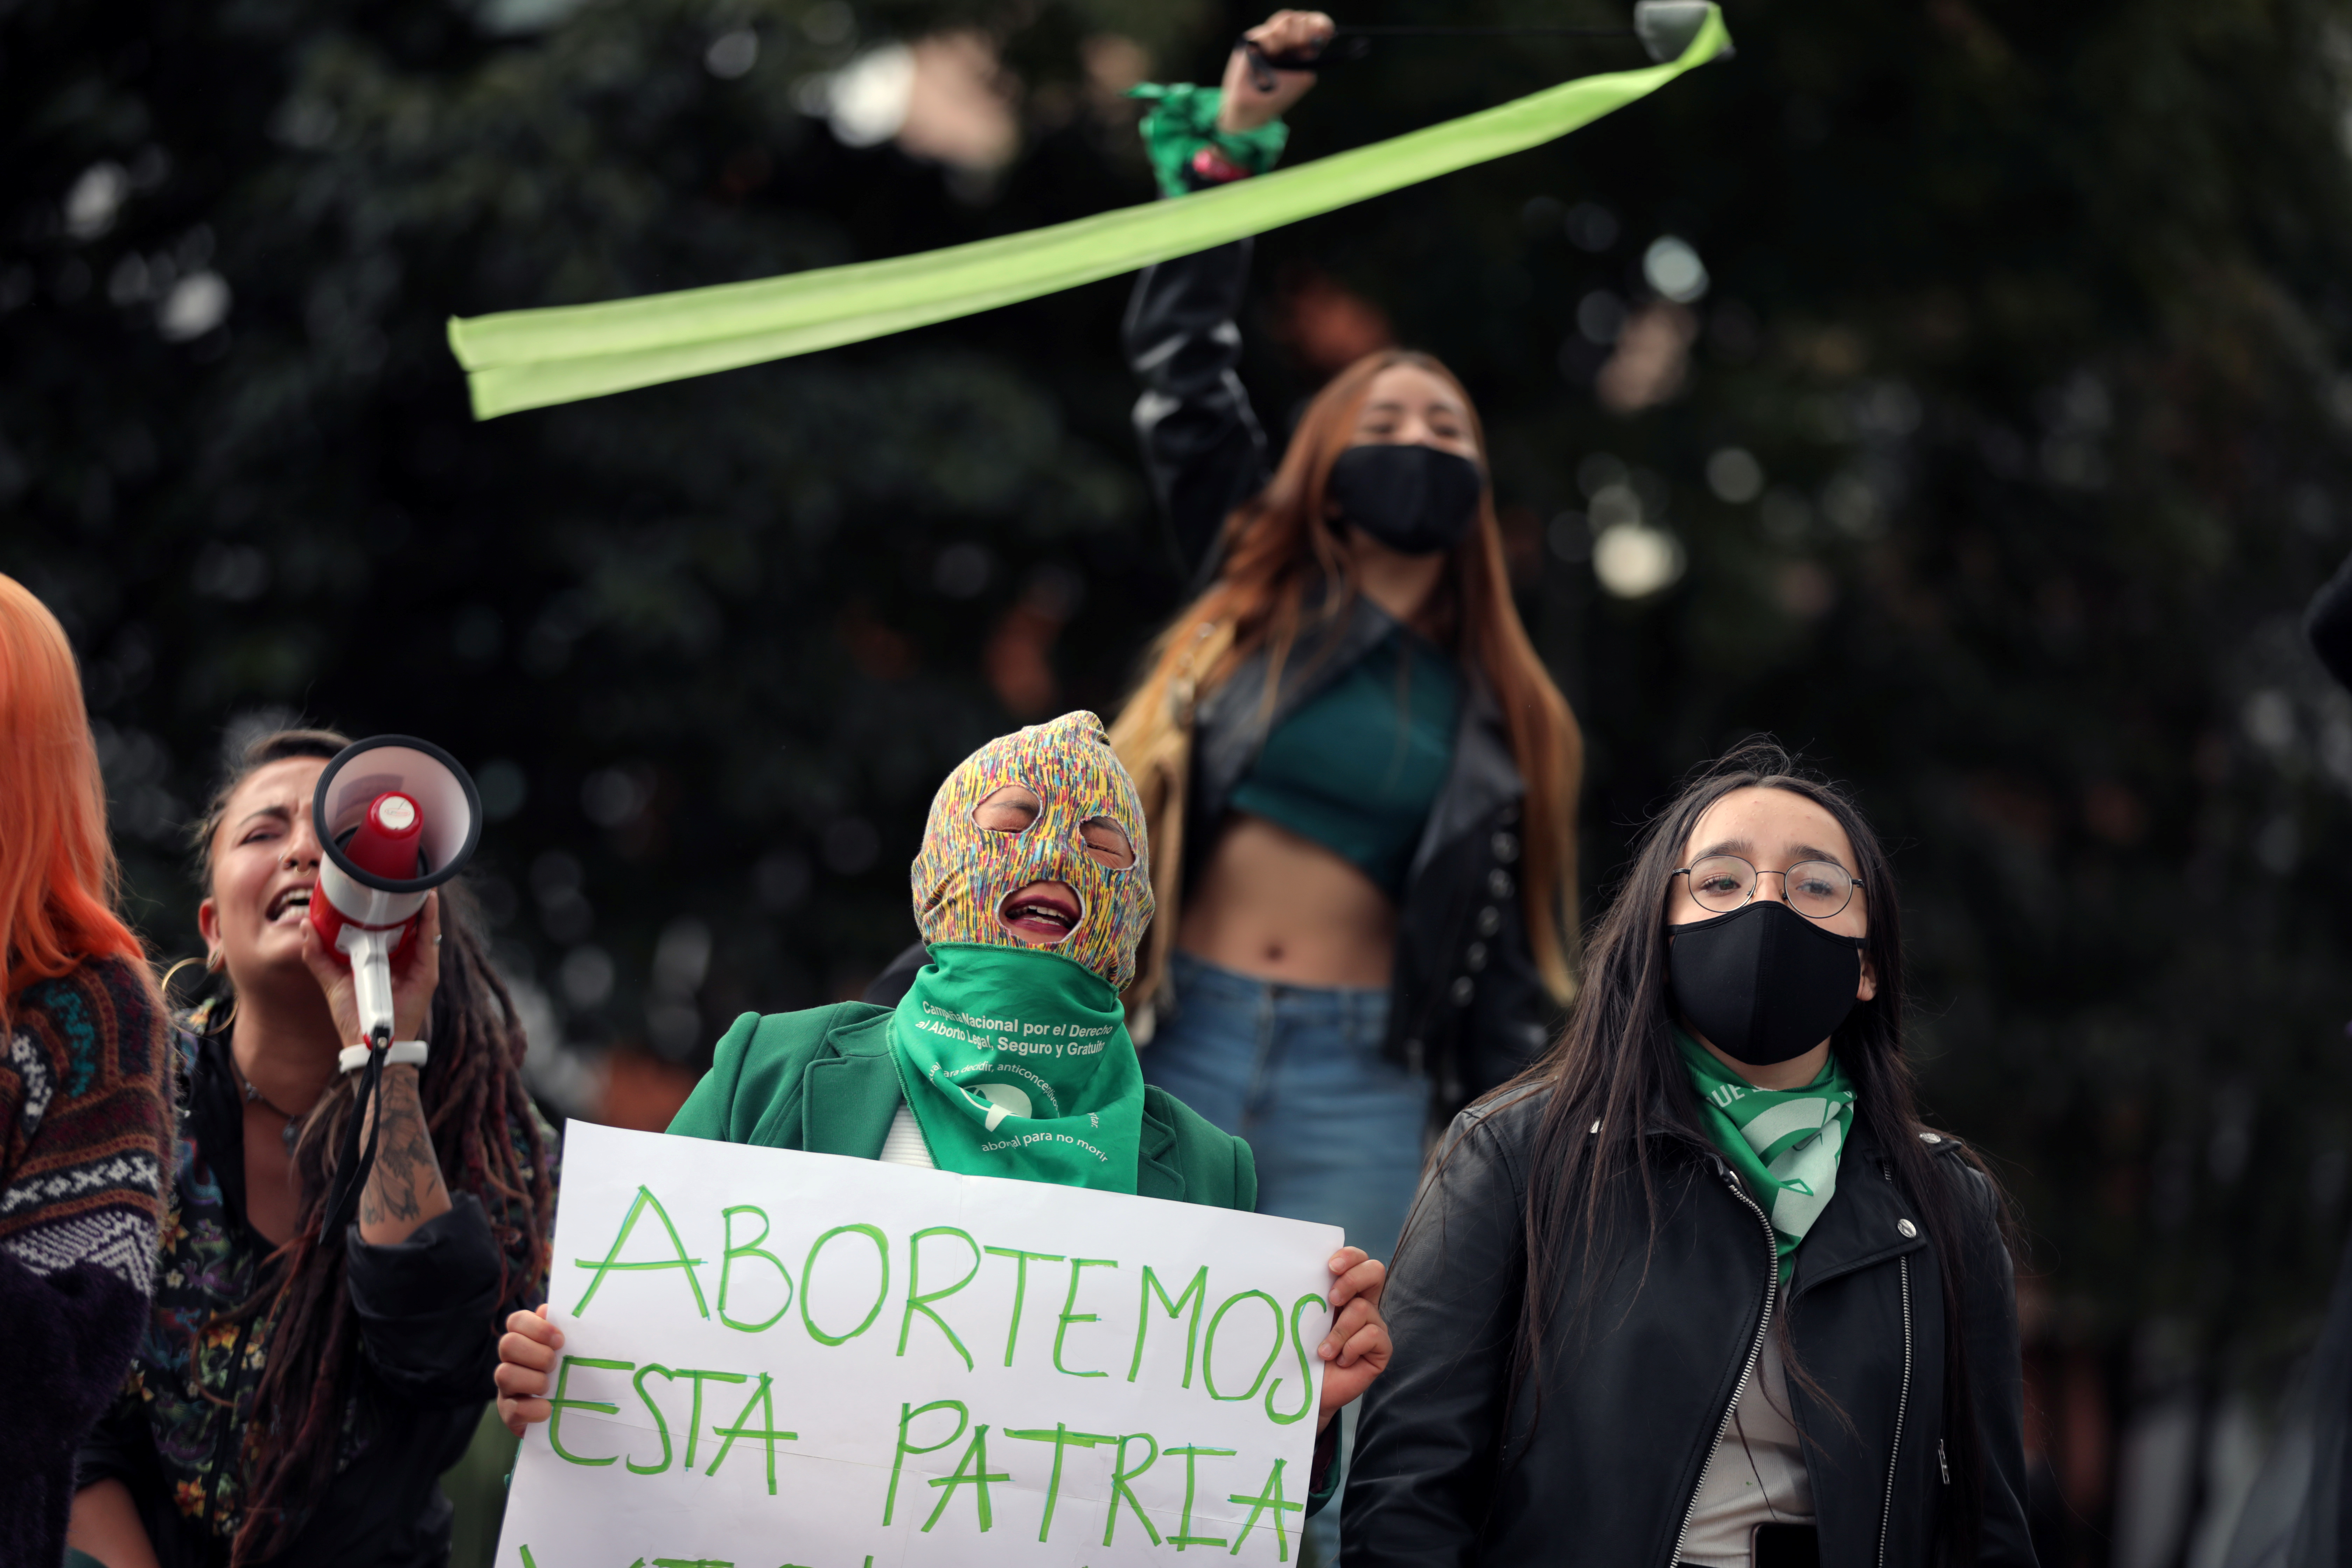 Demonstrators and activists take part in a rally in support of legal and safe abortion during a march to mark the International Safe Abortion Day in Bogota, Colombia September 28, 2020. Placard reads "let's abort this violent homeland". REUTERS/Luisa Gonzalez